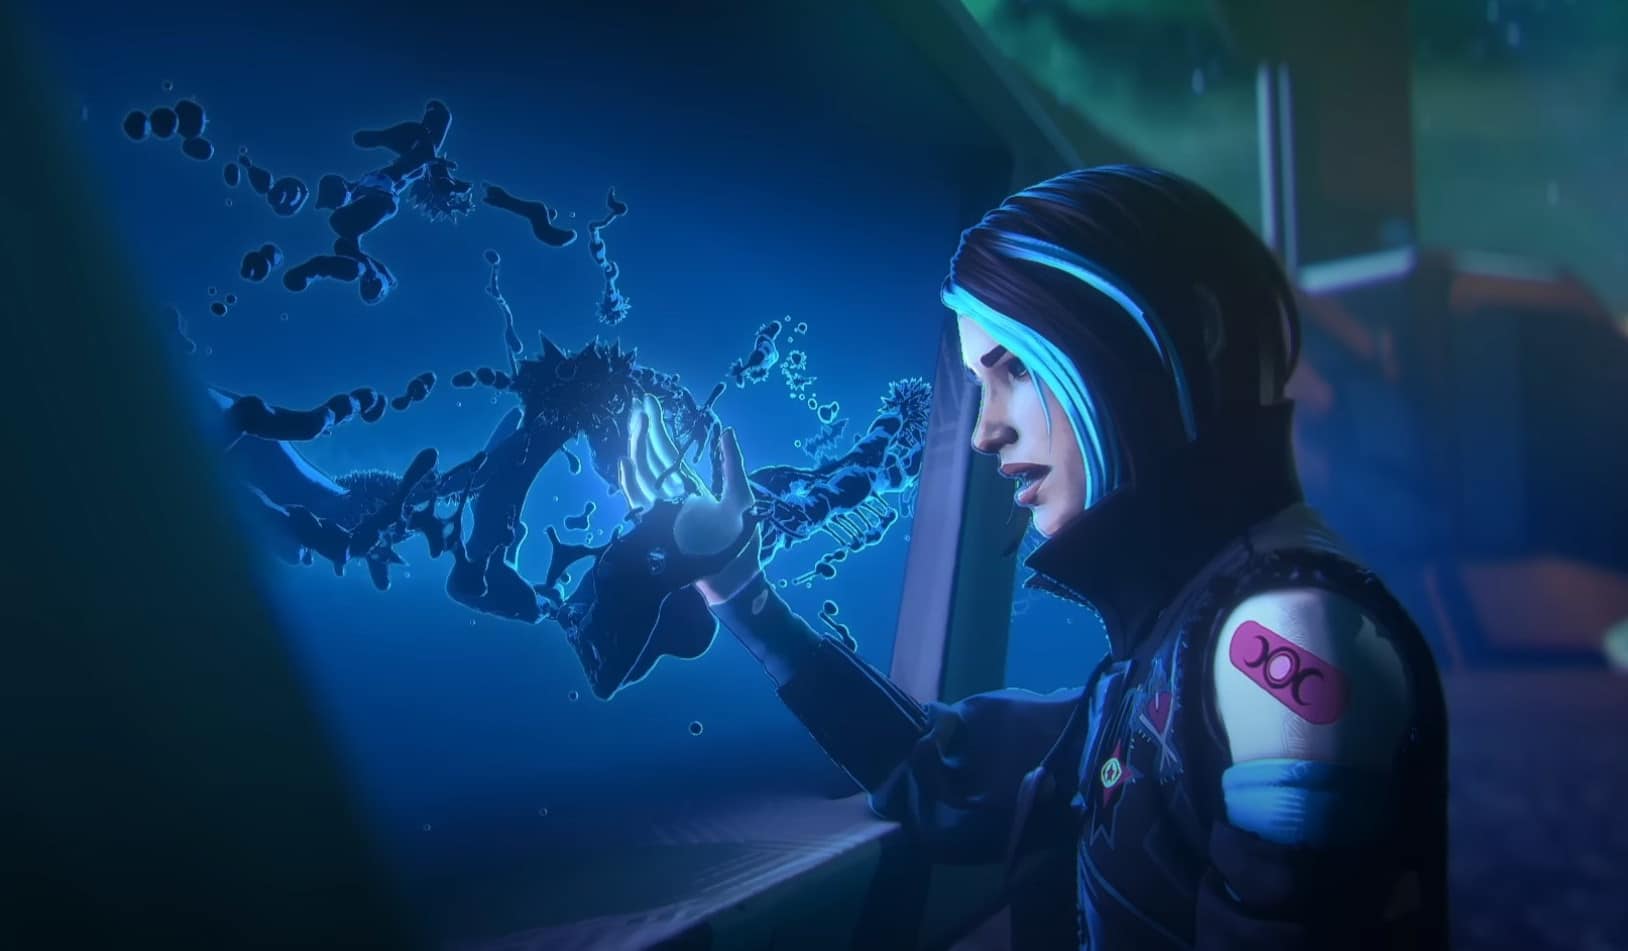 Catalyst waves her hand through ferrofluid and looks surprised in an Apex Legends trailer